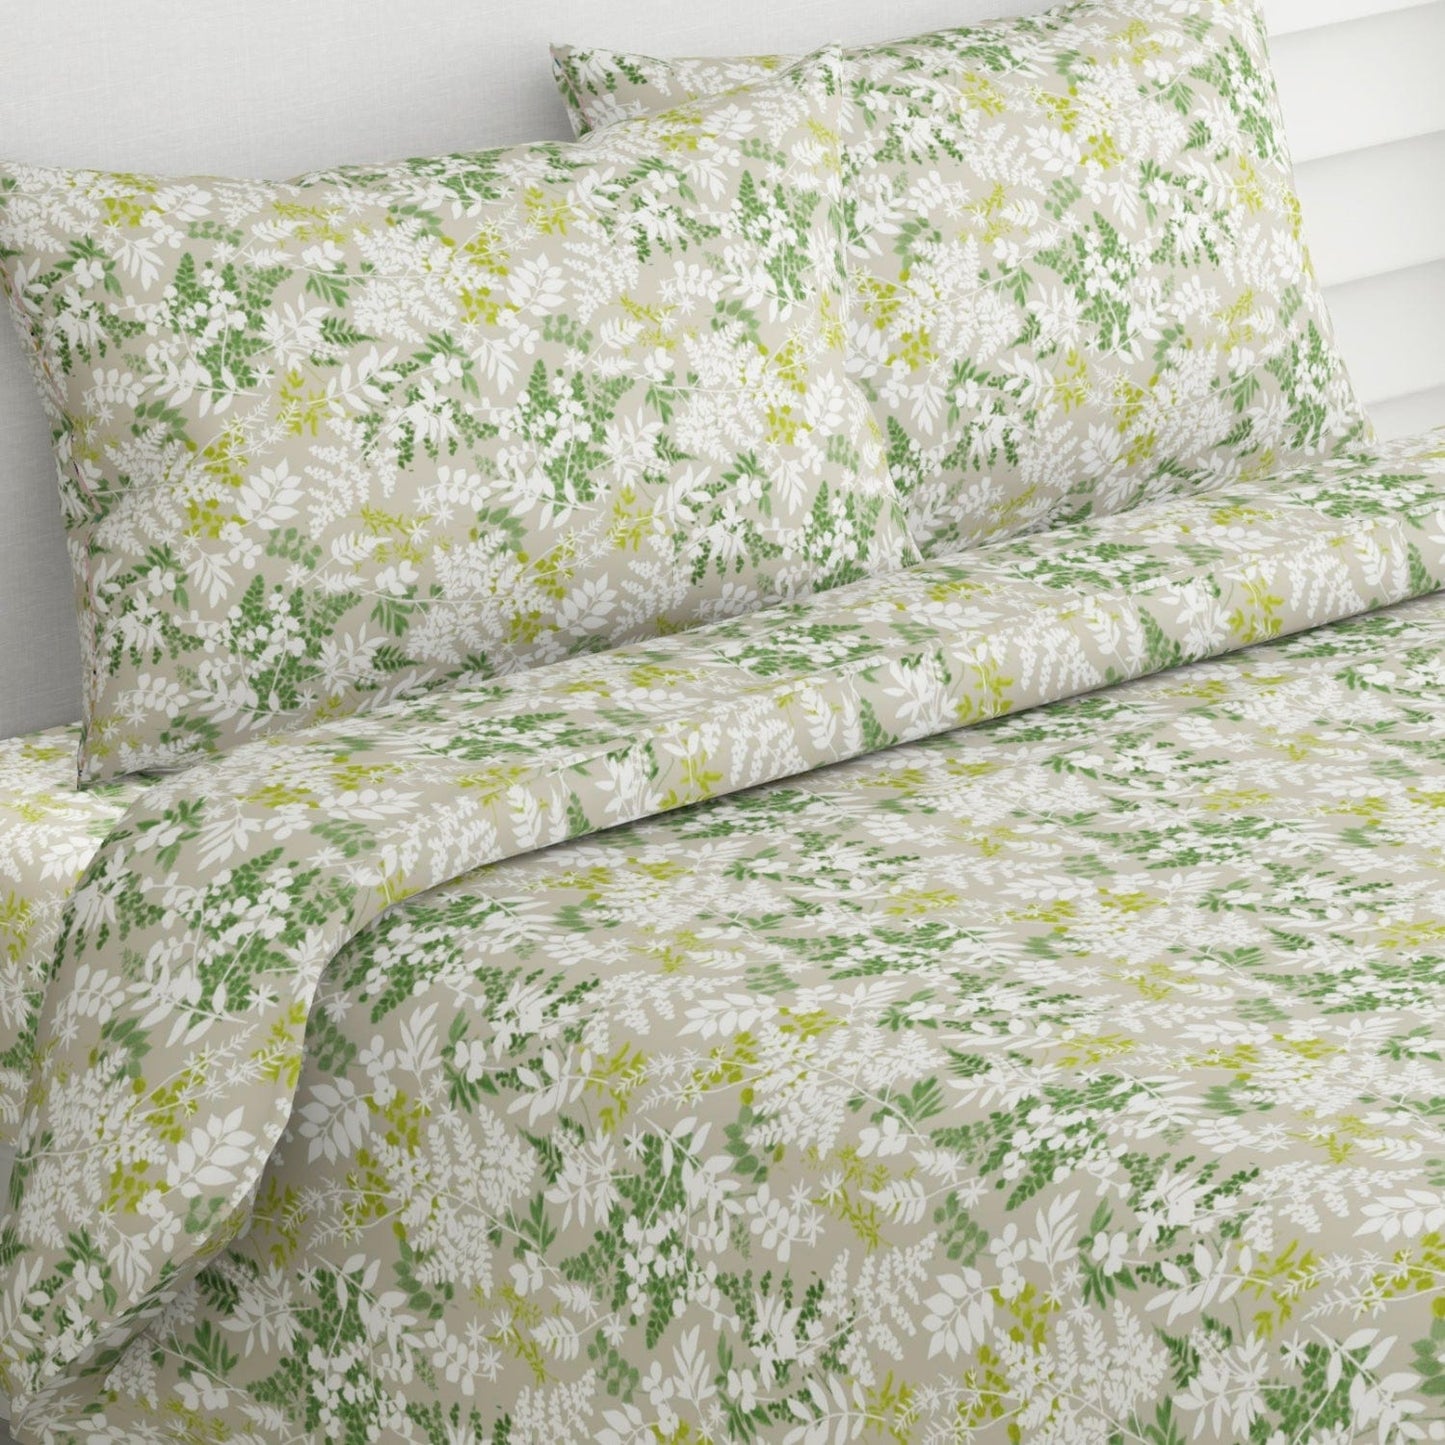 Green Leaves, 100% Cotton Double Size Bedsheet, 104 TC